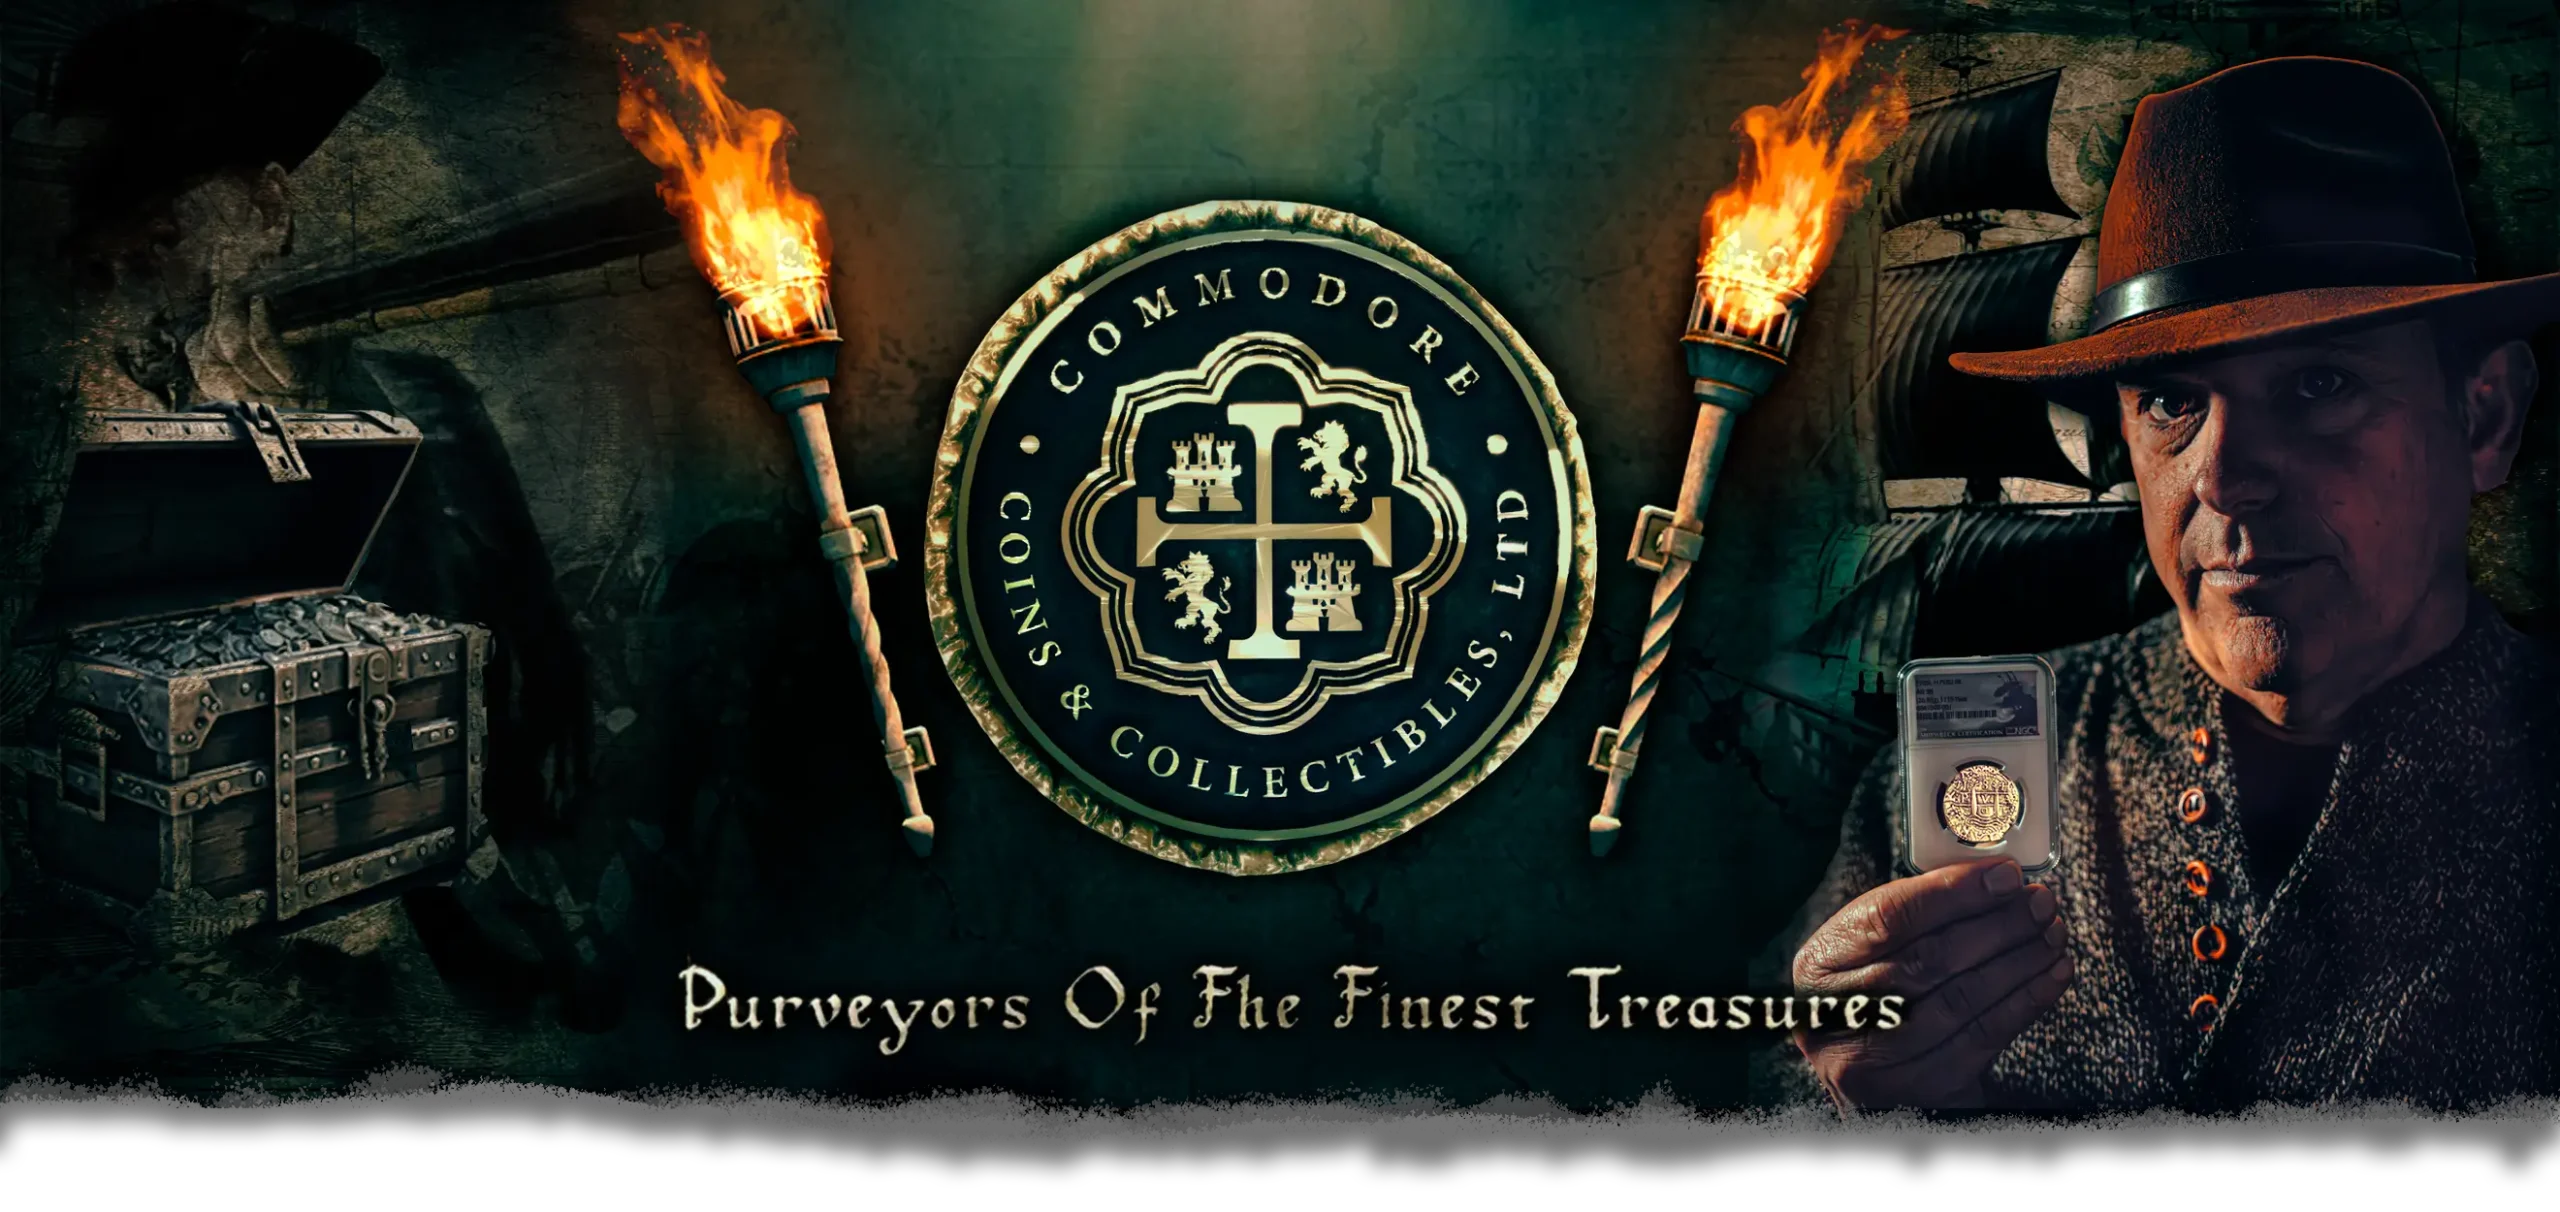 Purveyors of the Finest Treasures